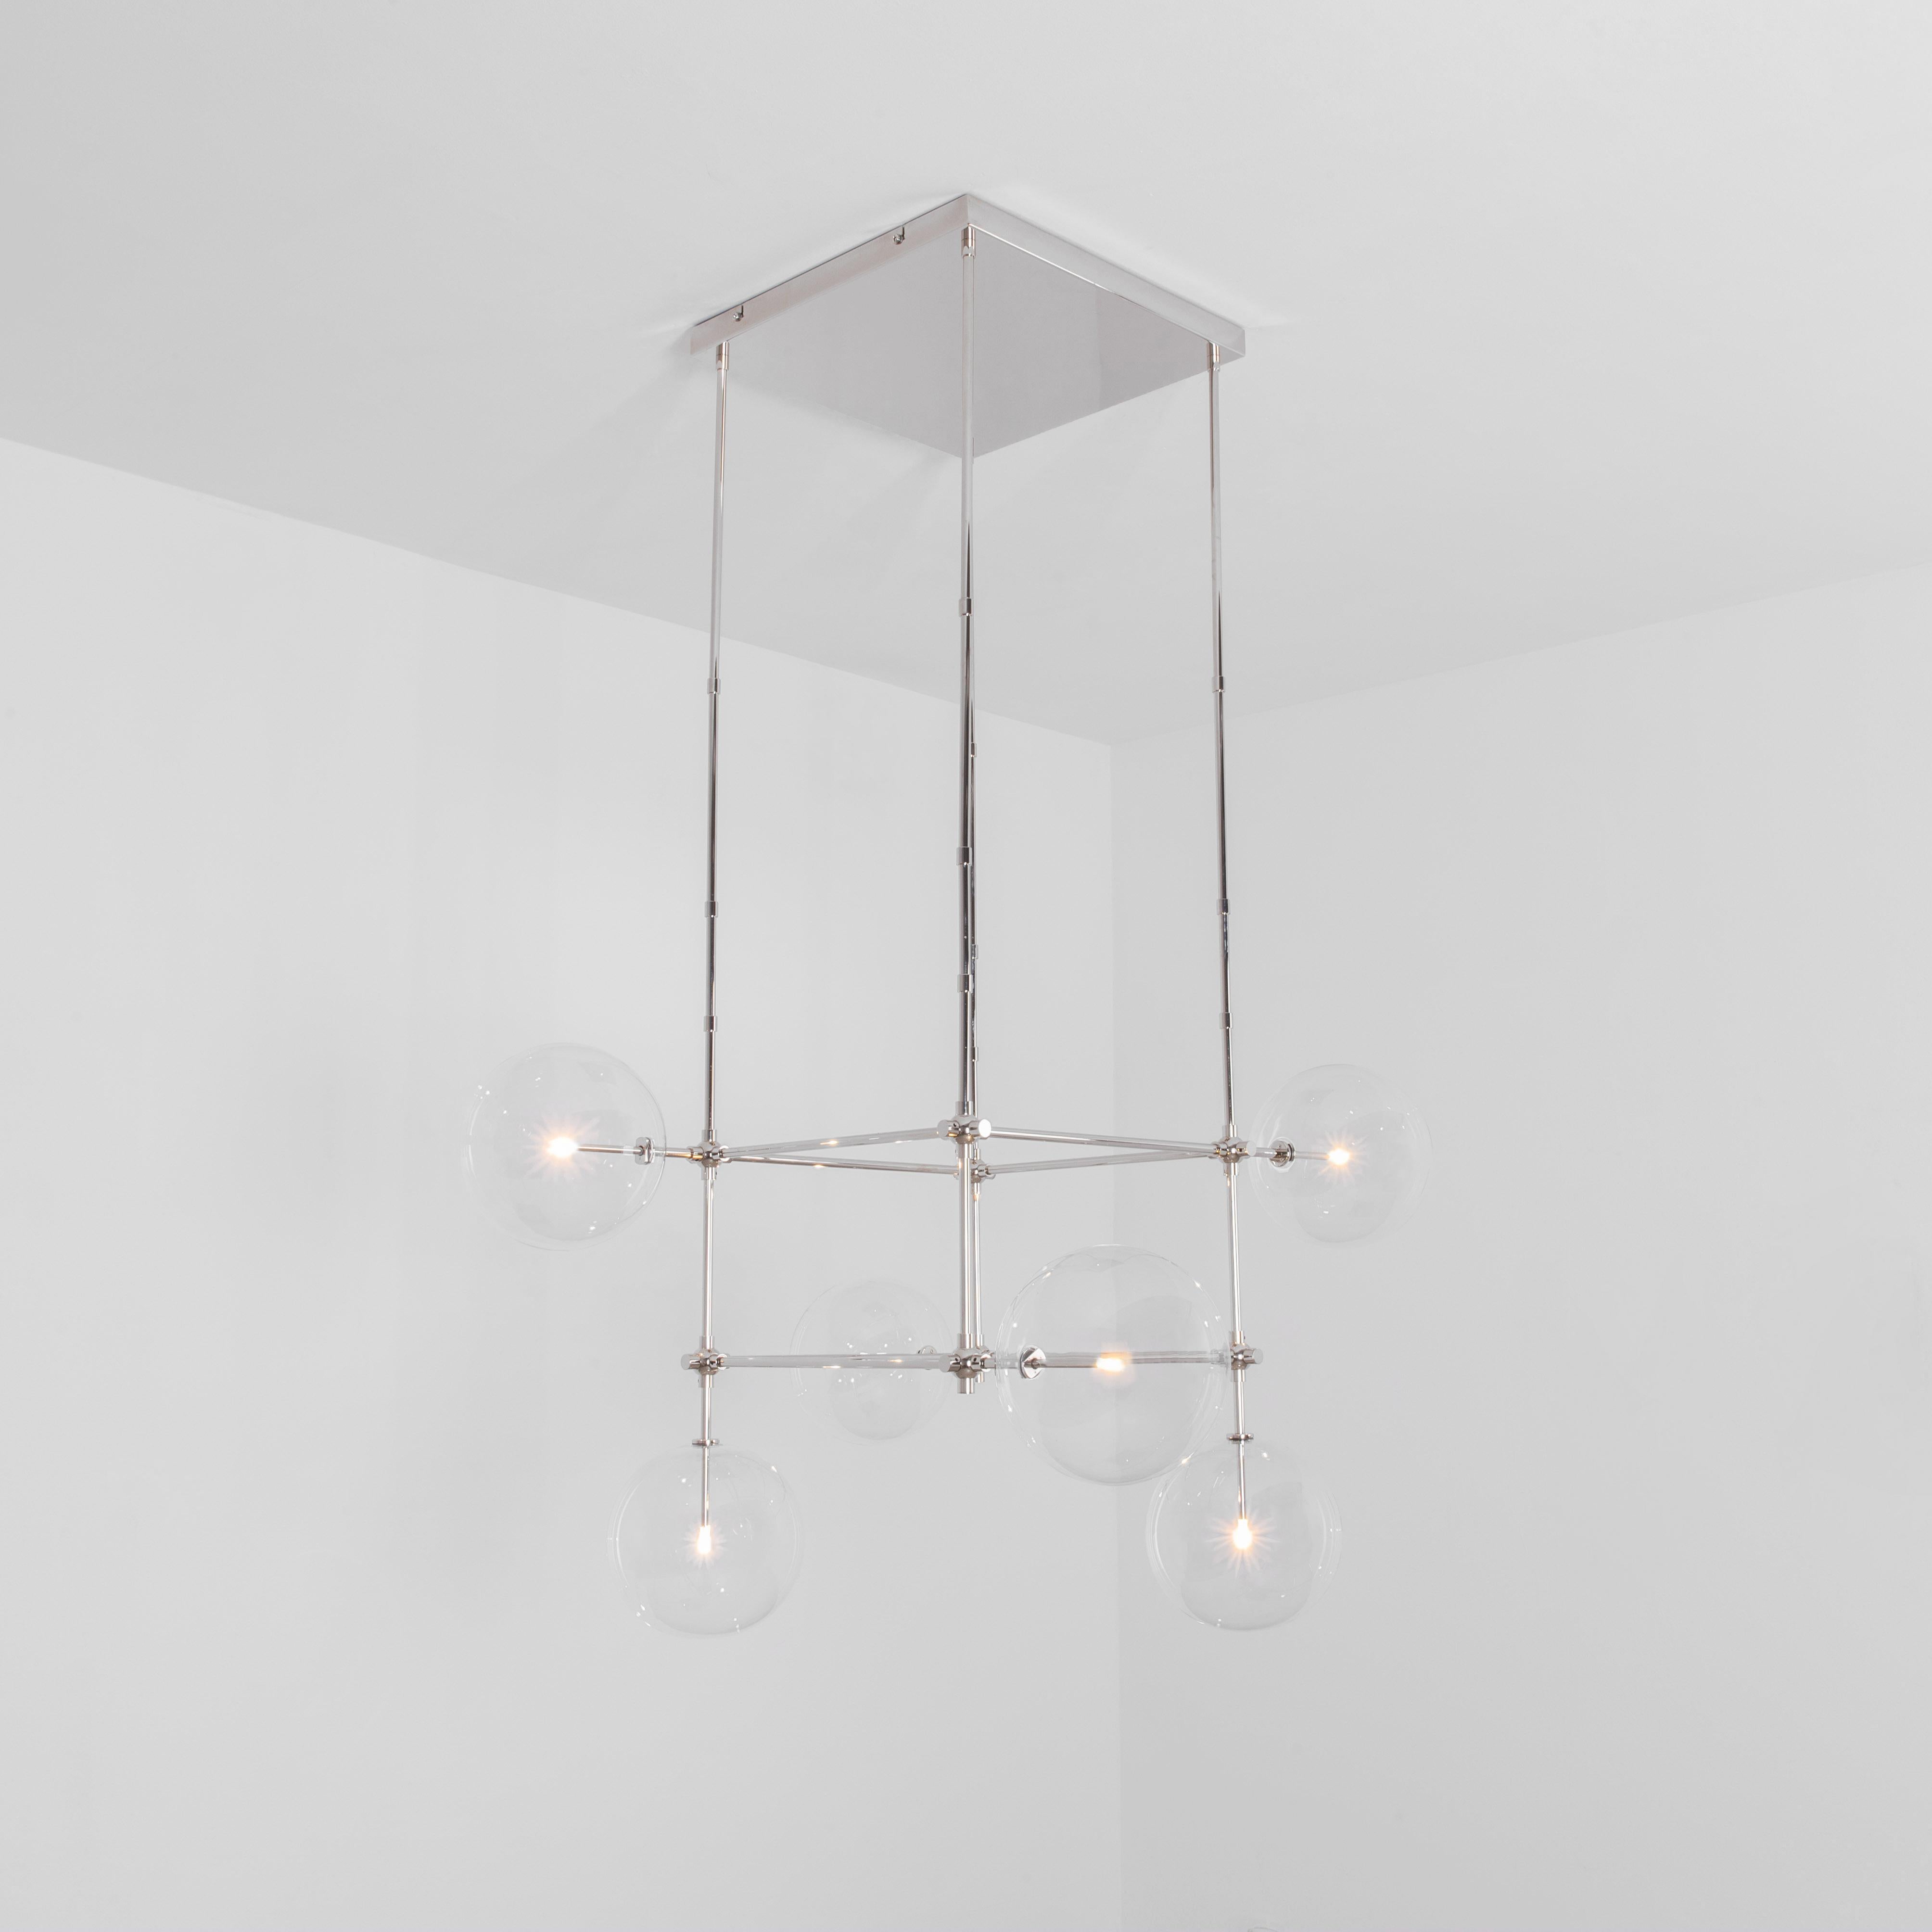 Soap 6 DT Chandelier by Schwung
Dimensions: W 117 x D 117 x H 173 cm 
Materials: Metal, hand blown glass globes
Finishes: Polished nickel
Other finishes available: Black gunmetal, natural brass

  

Max wattage: 1.6W
Bulb base: G4, 12V